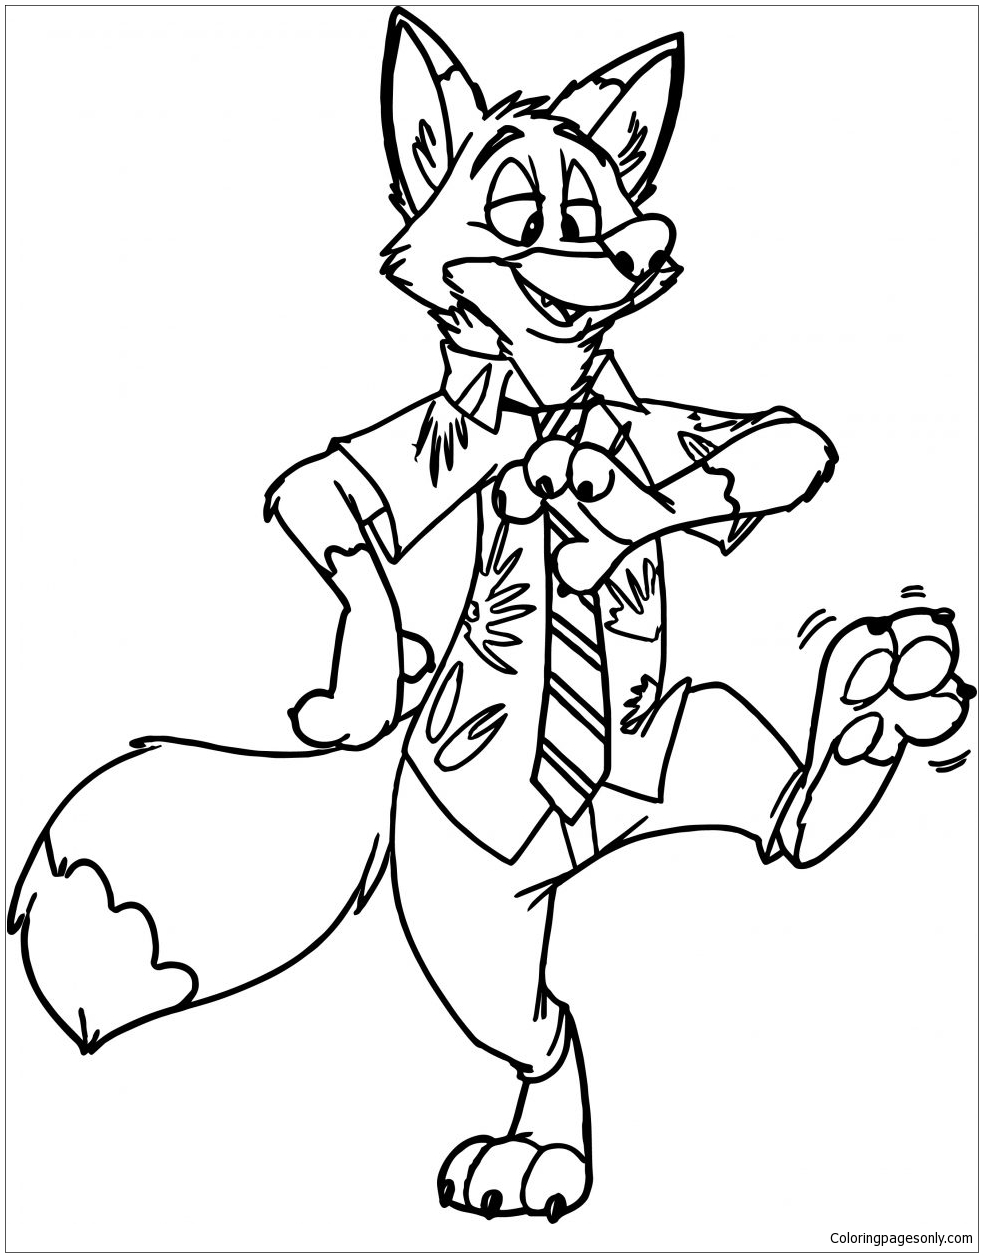 Nick Wilde Zootopia Coloring Page